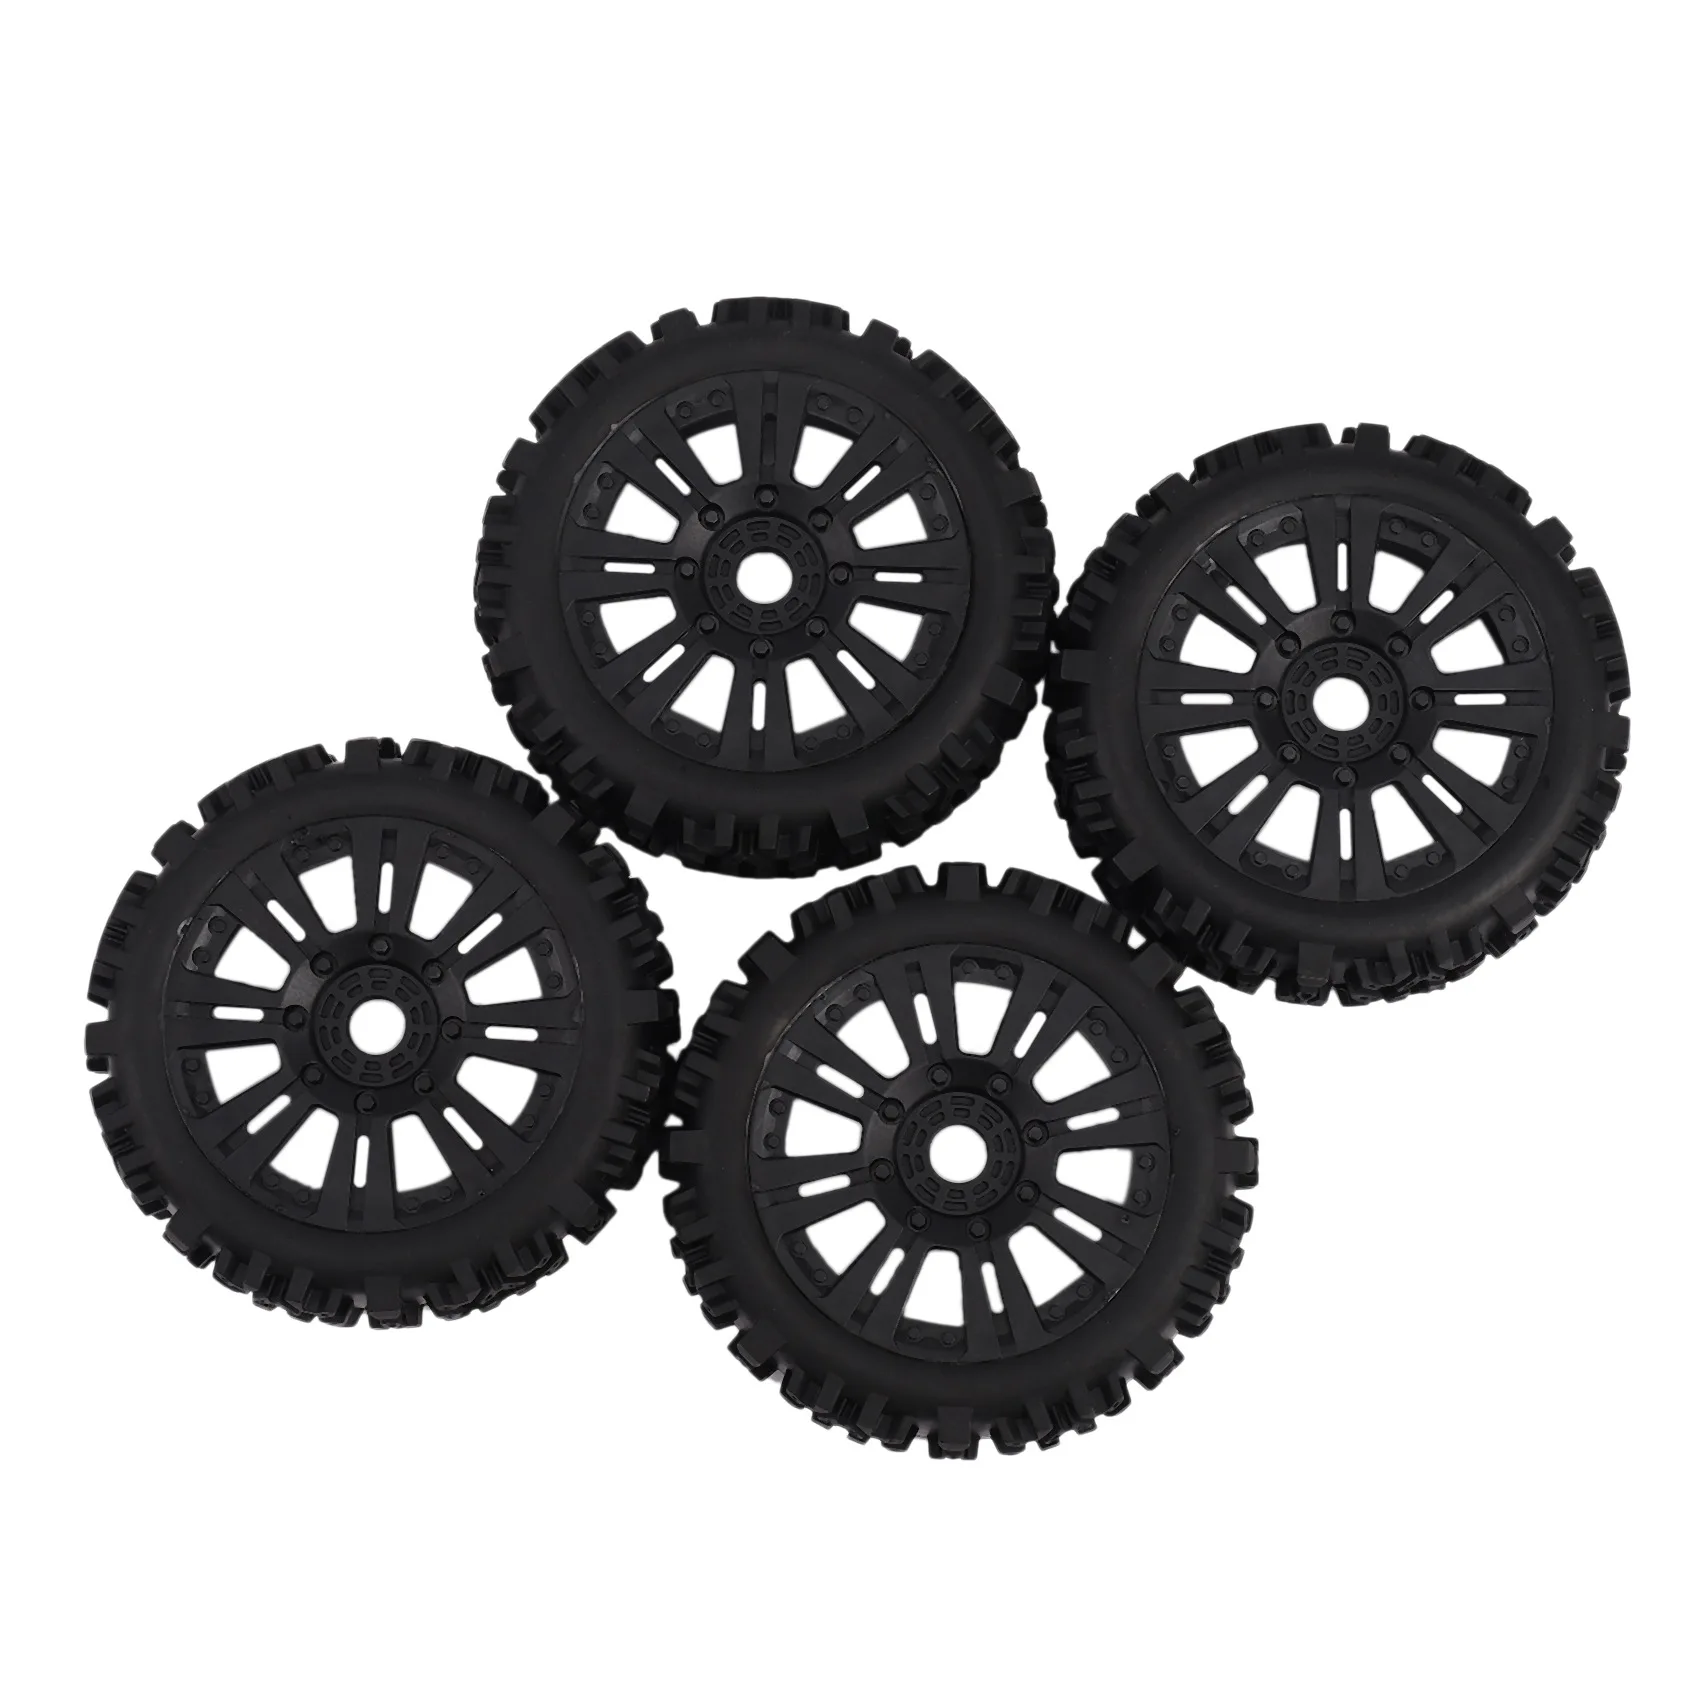 

17mm Hub Wheel Rim & Tires Tyre for 1/8 Off-Road RC Car Buggy Redcat Team Losi VRX HPI Kyosho HSP Carson Hobao 4Pcs